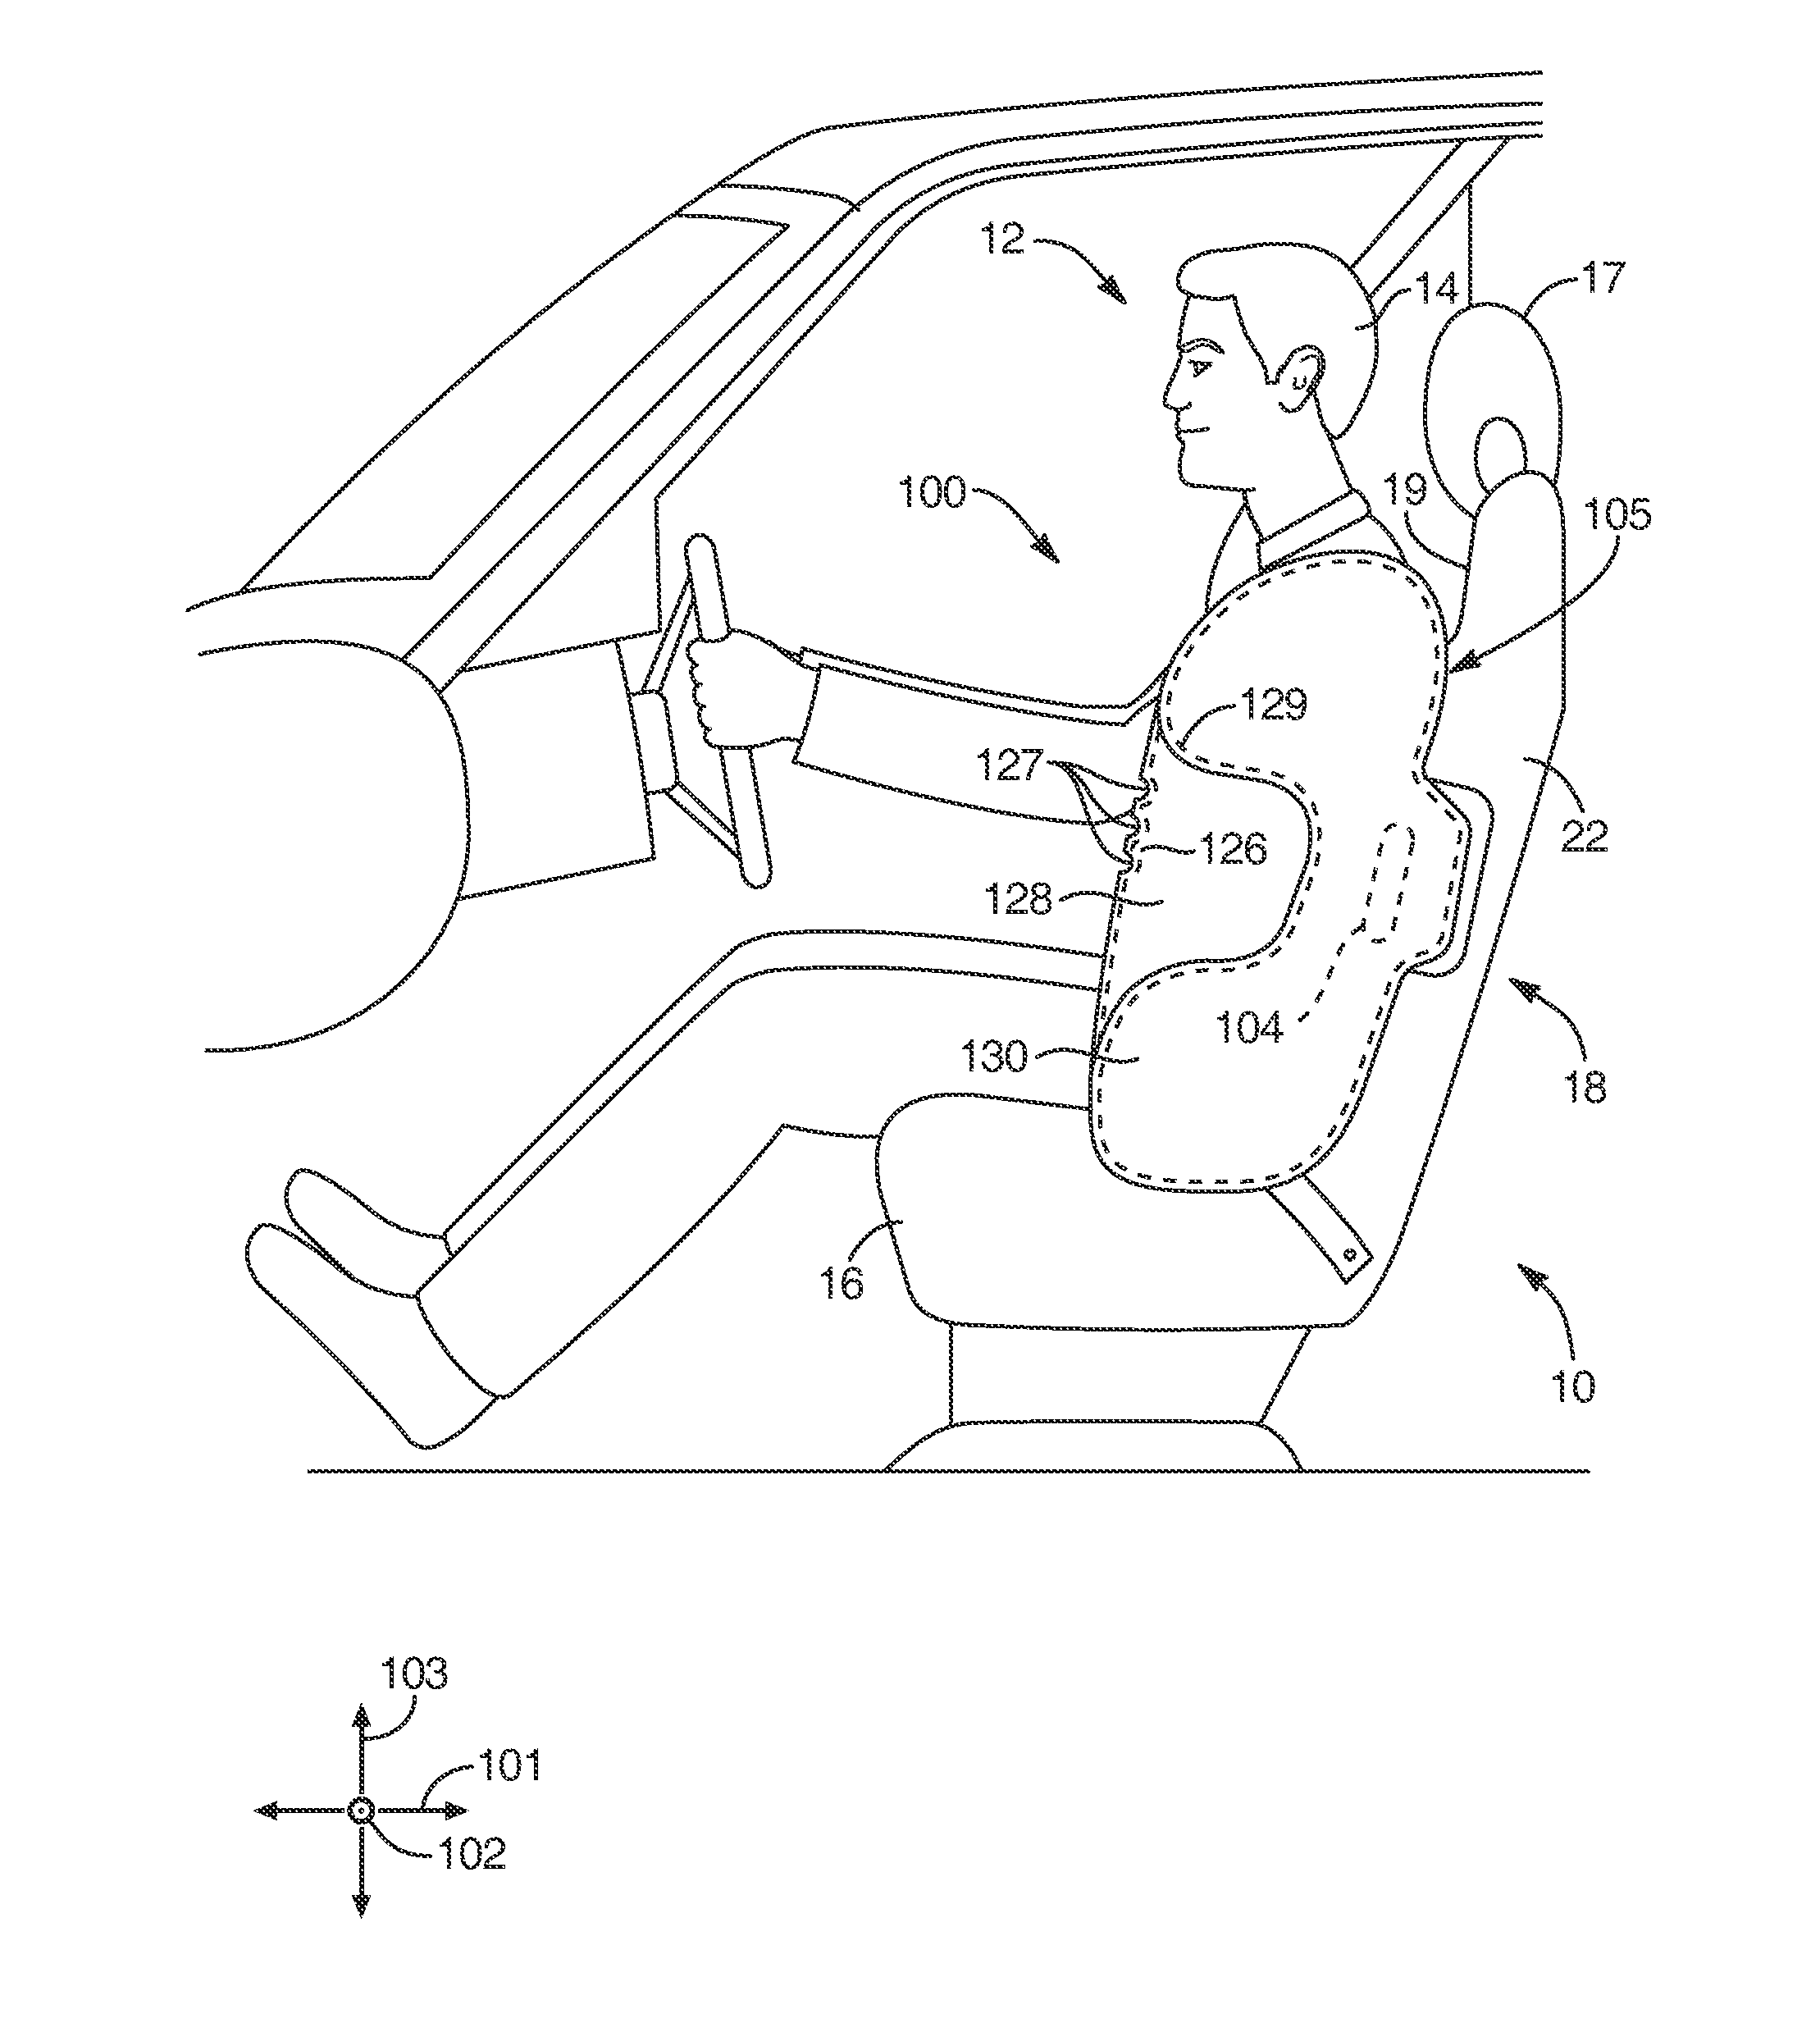 3-layer "c" shaped side airbag